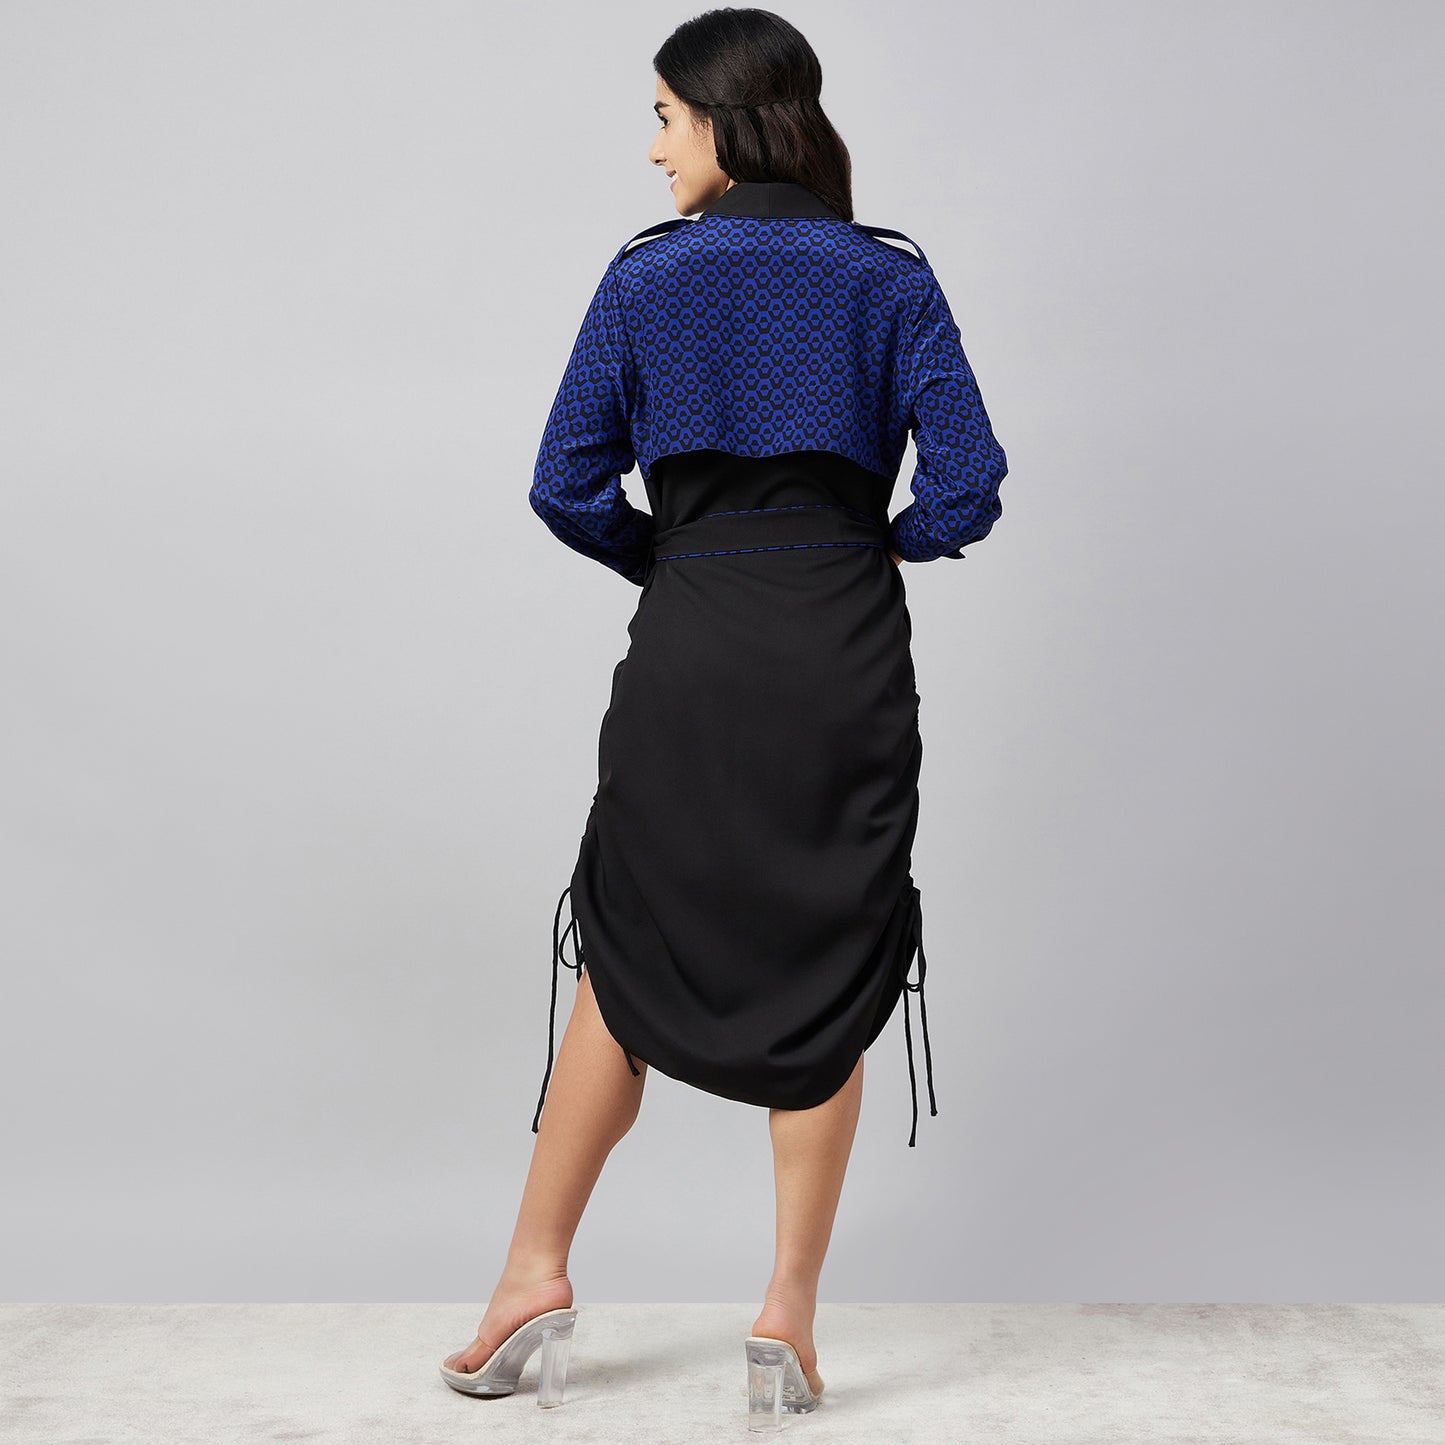 Black and Blue Houndstooth Print Shirt Dress with Belt